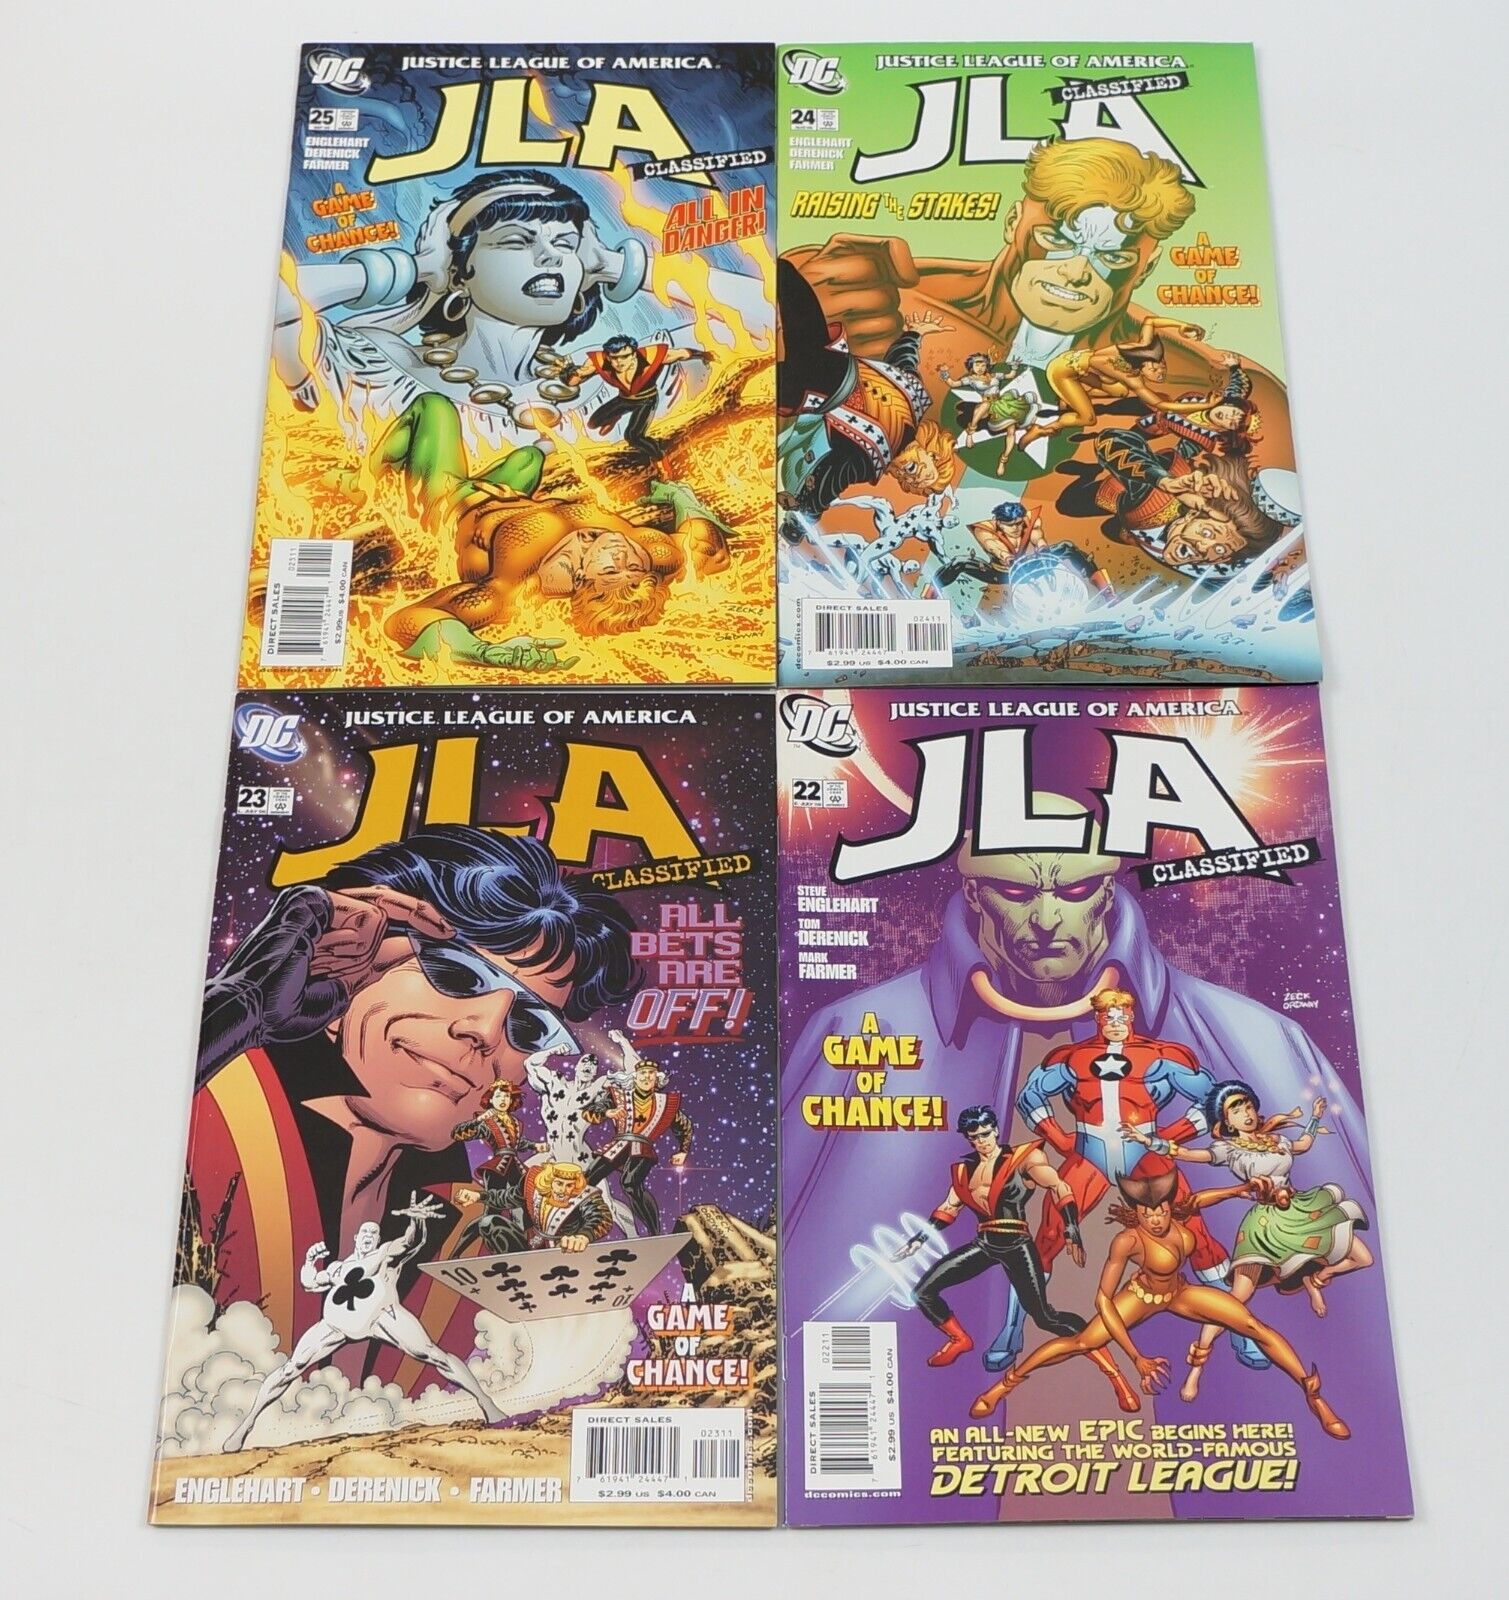 JLA Classified: A Game of Chance #1-4 VF/NM complete story DC set 22 23 24 25